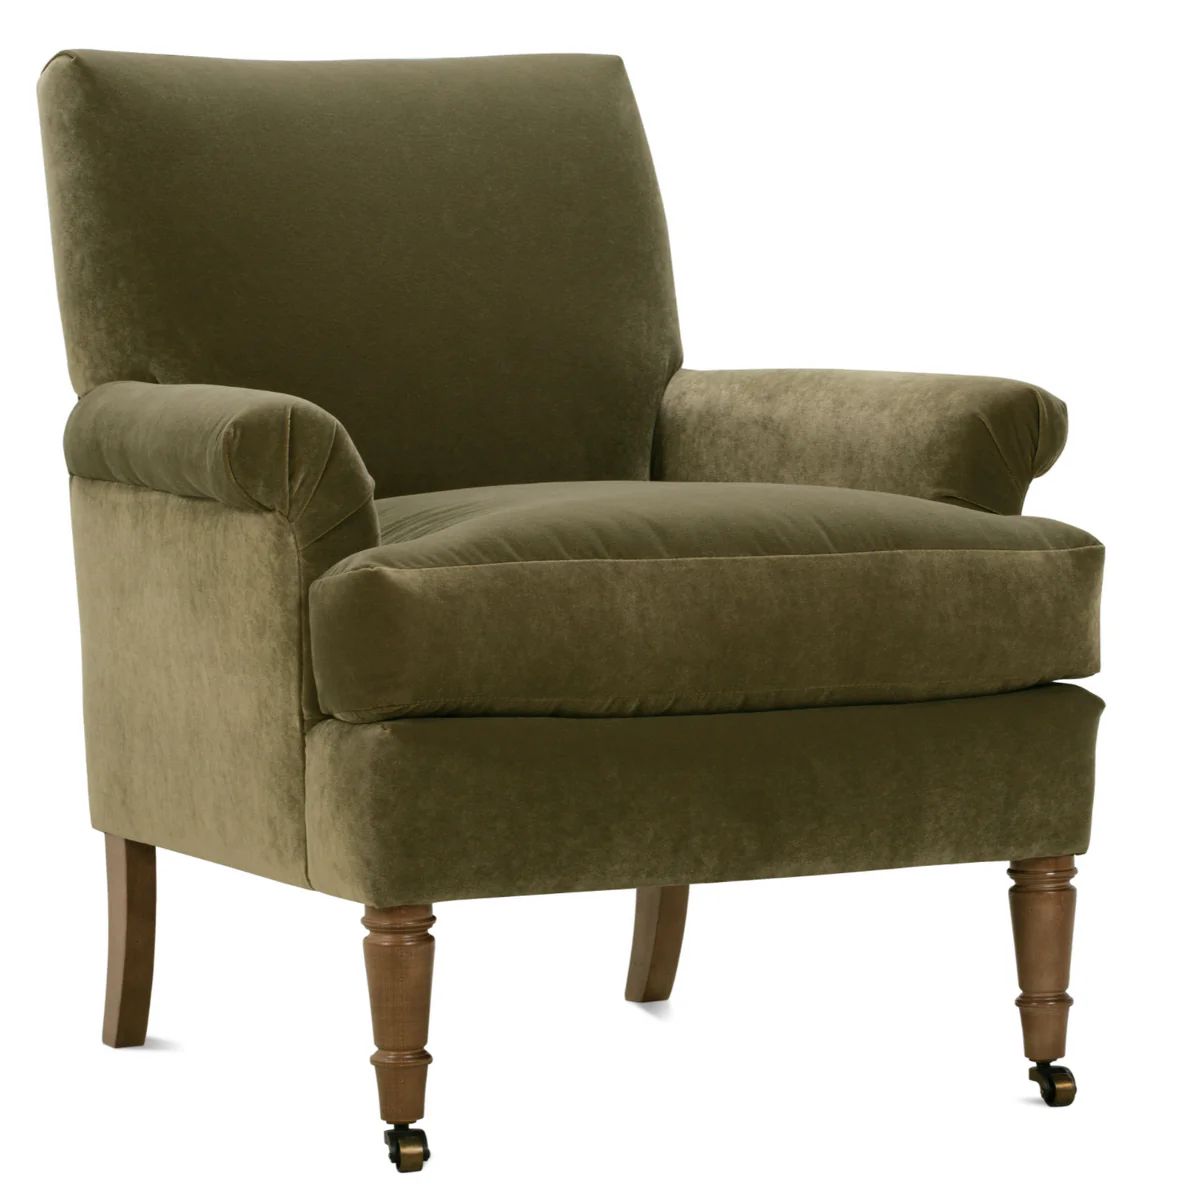 Wilhelm Upholstered Chair | Stoffer Home